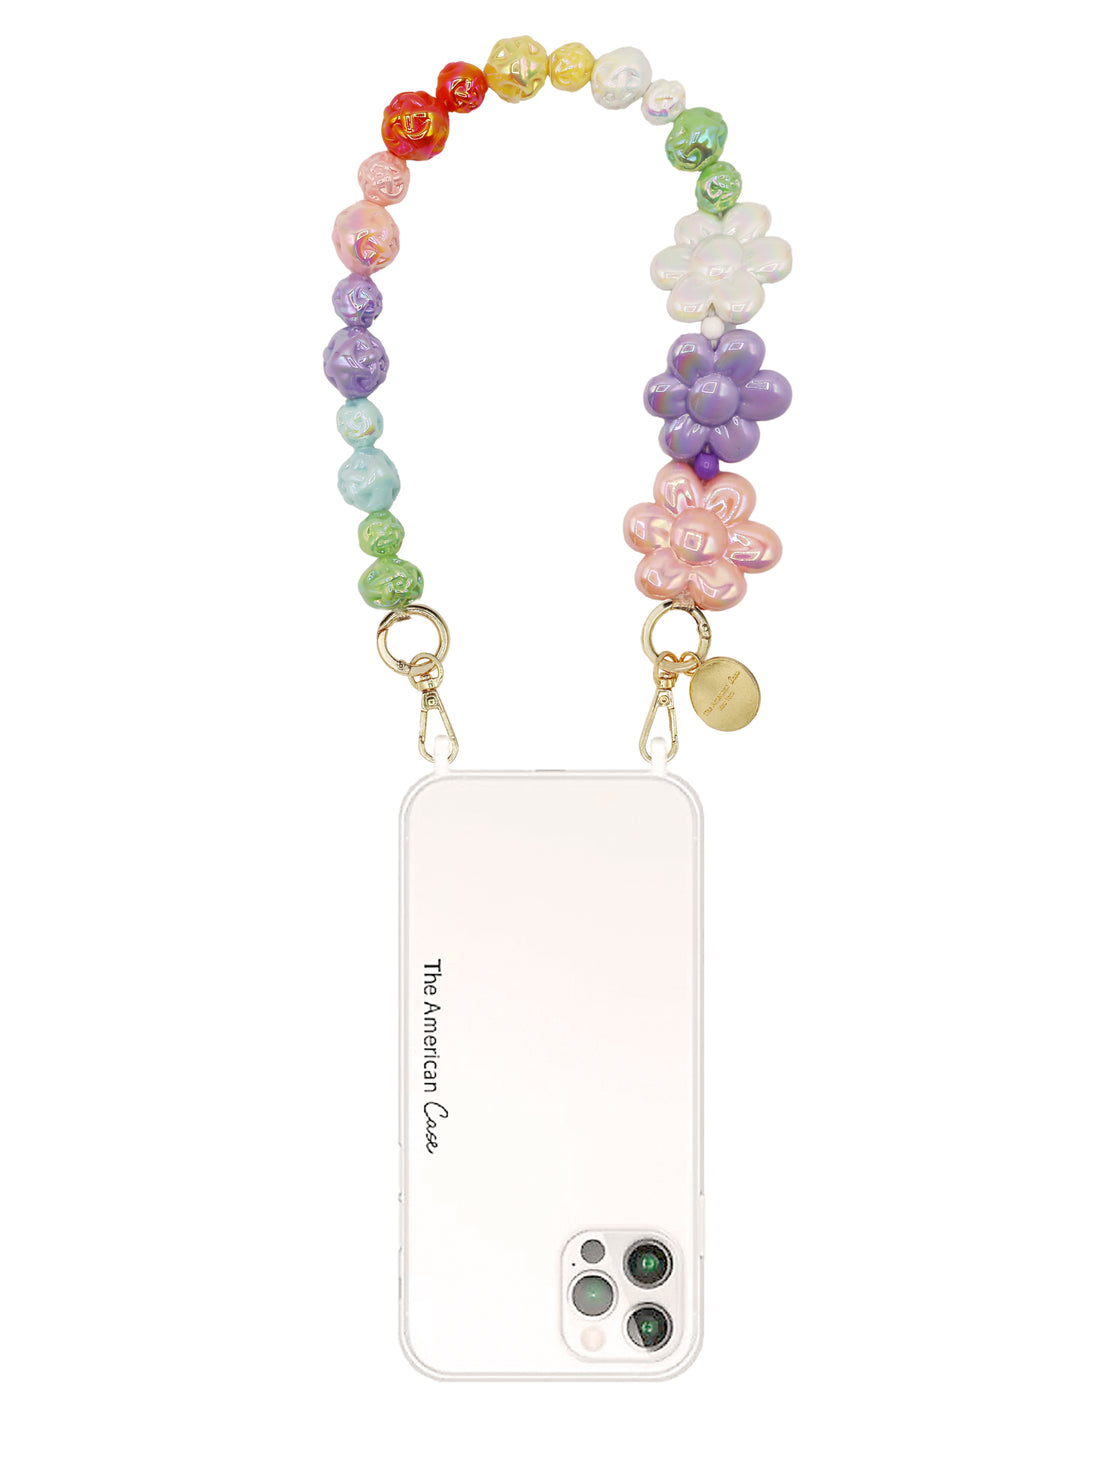 Daphne - Glossy Flower and  Bead Bracelet Phone Chain With Golden Carabiners